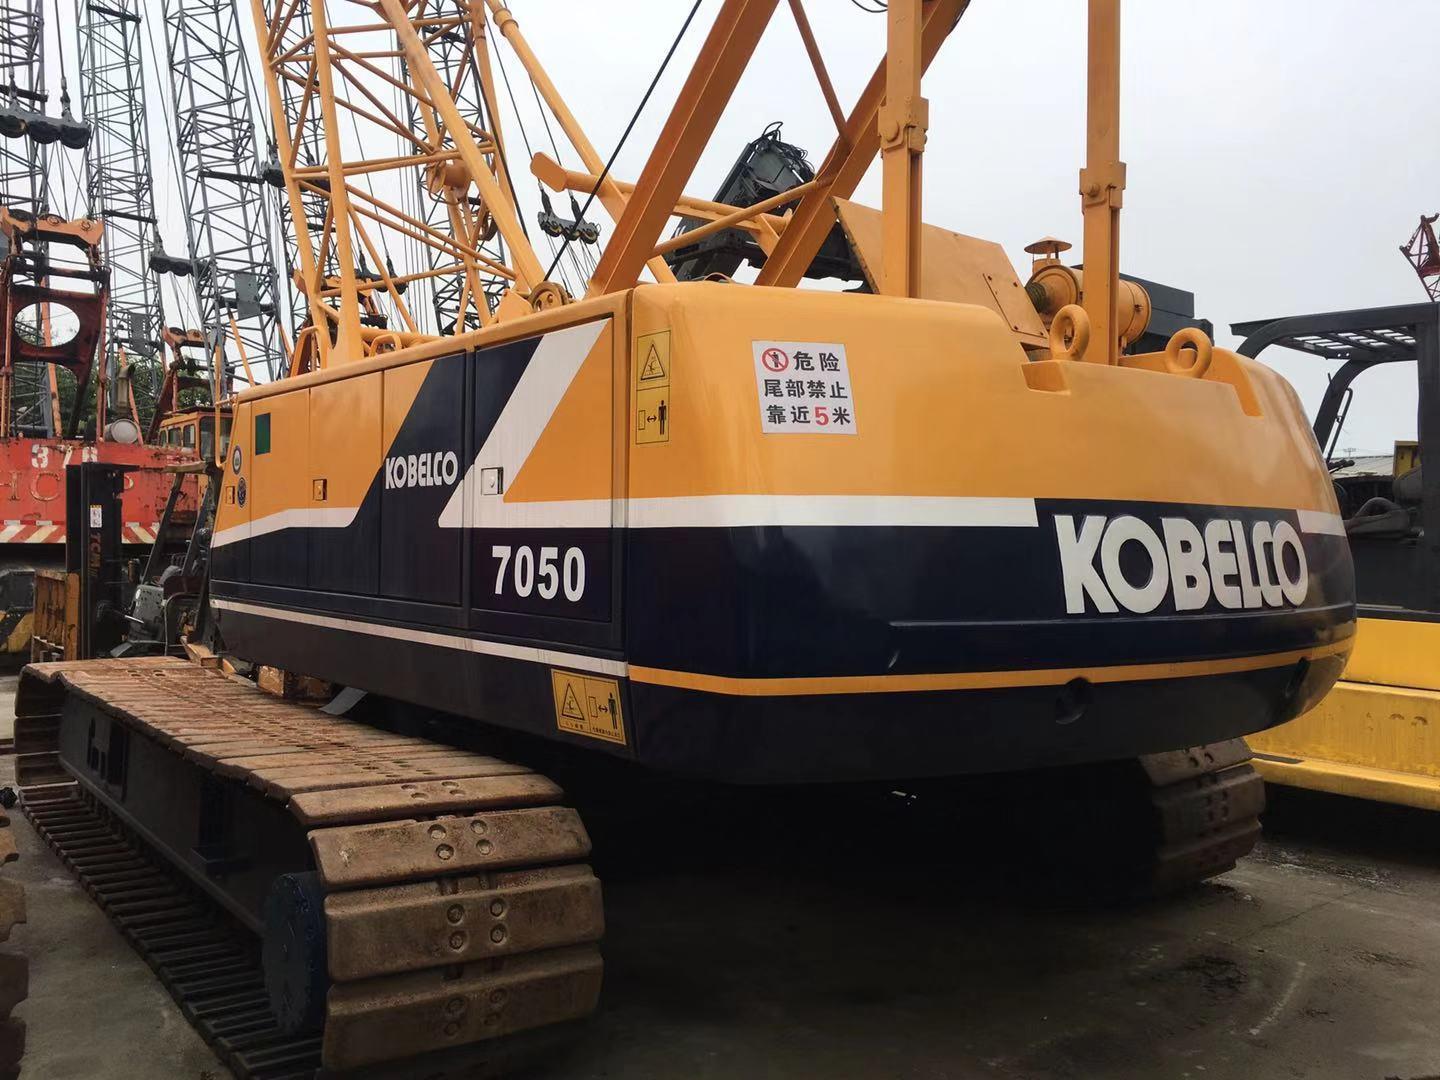 Used/Secondhand Kobelco 7050 50t Crane with Good Condition in Low Price for Hot Sale